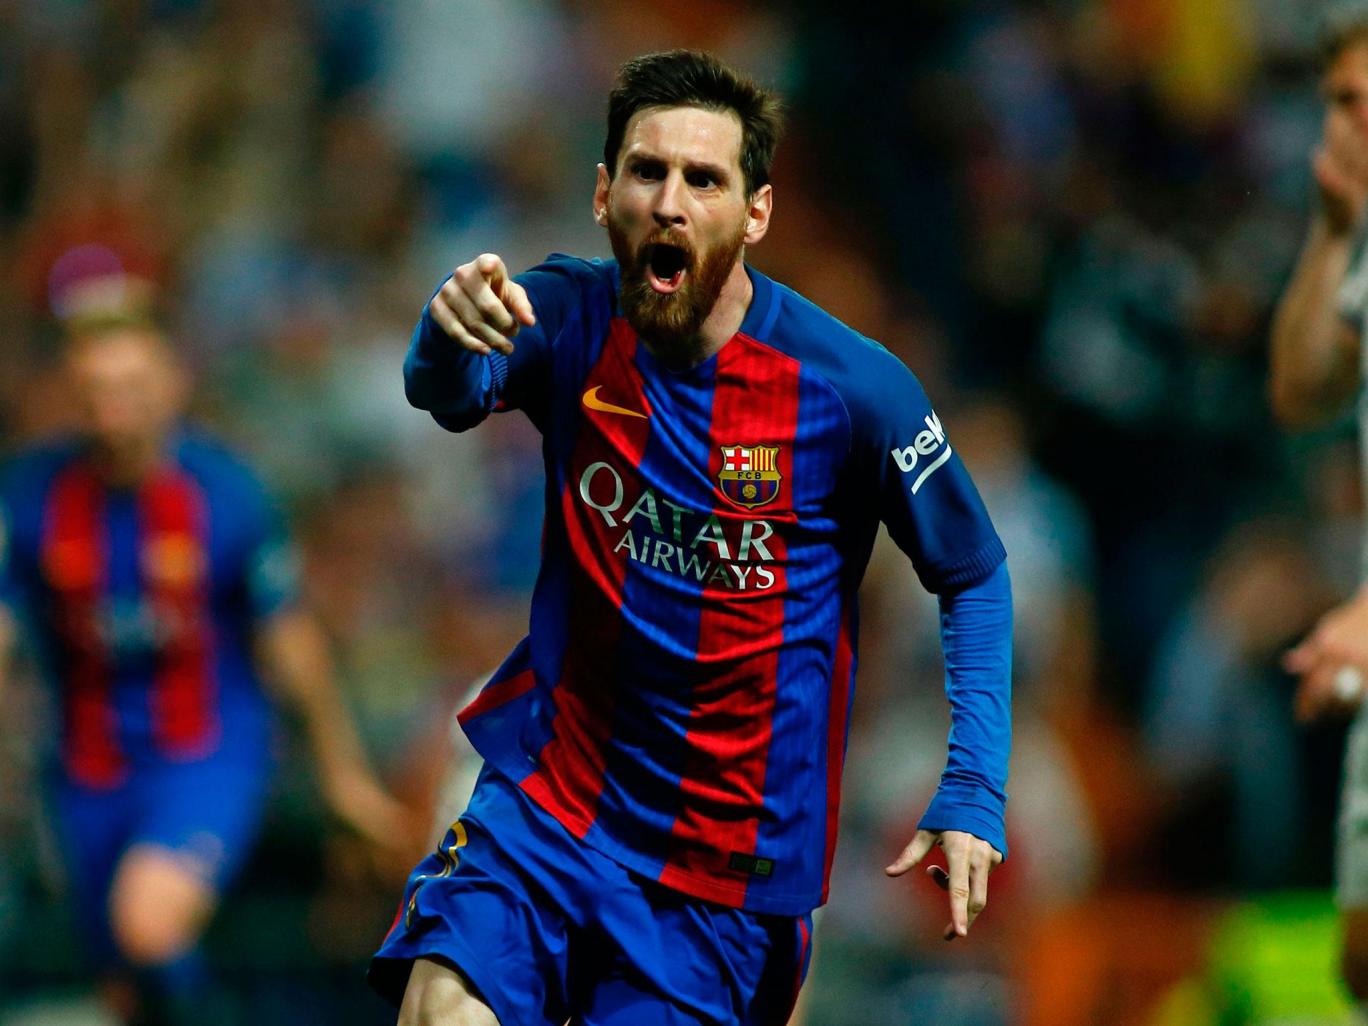 #GreenAtHeart – Lionel Messi funds construction of 20 new classrooms in ...